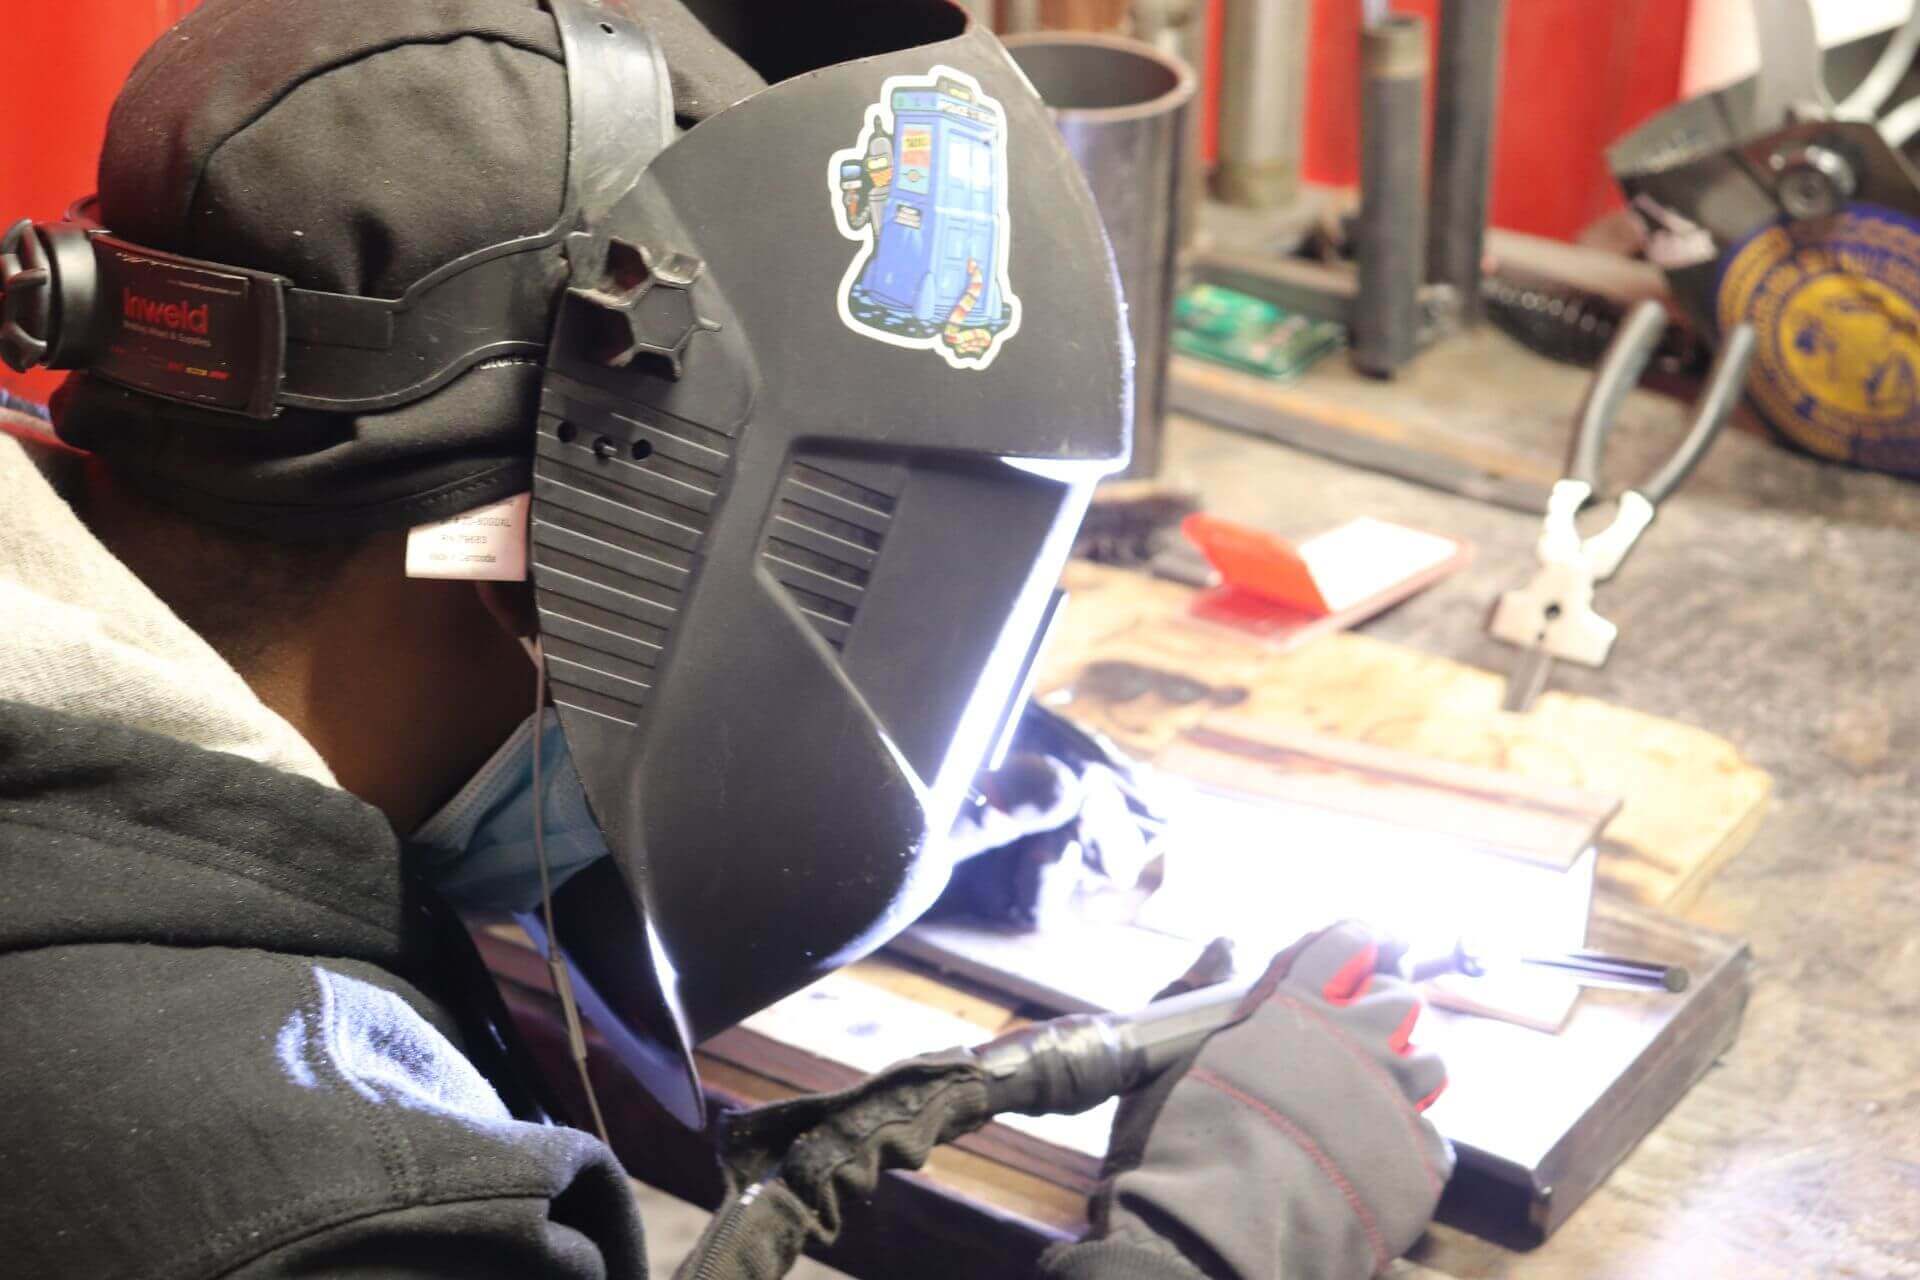 Why Is The Demand For Welding Jobs Increasing Every Year In The U.S.?